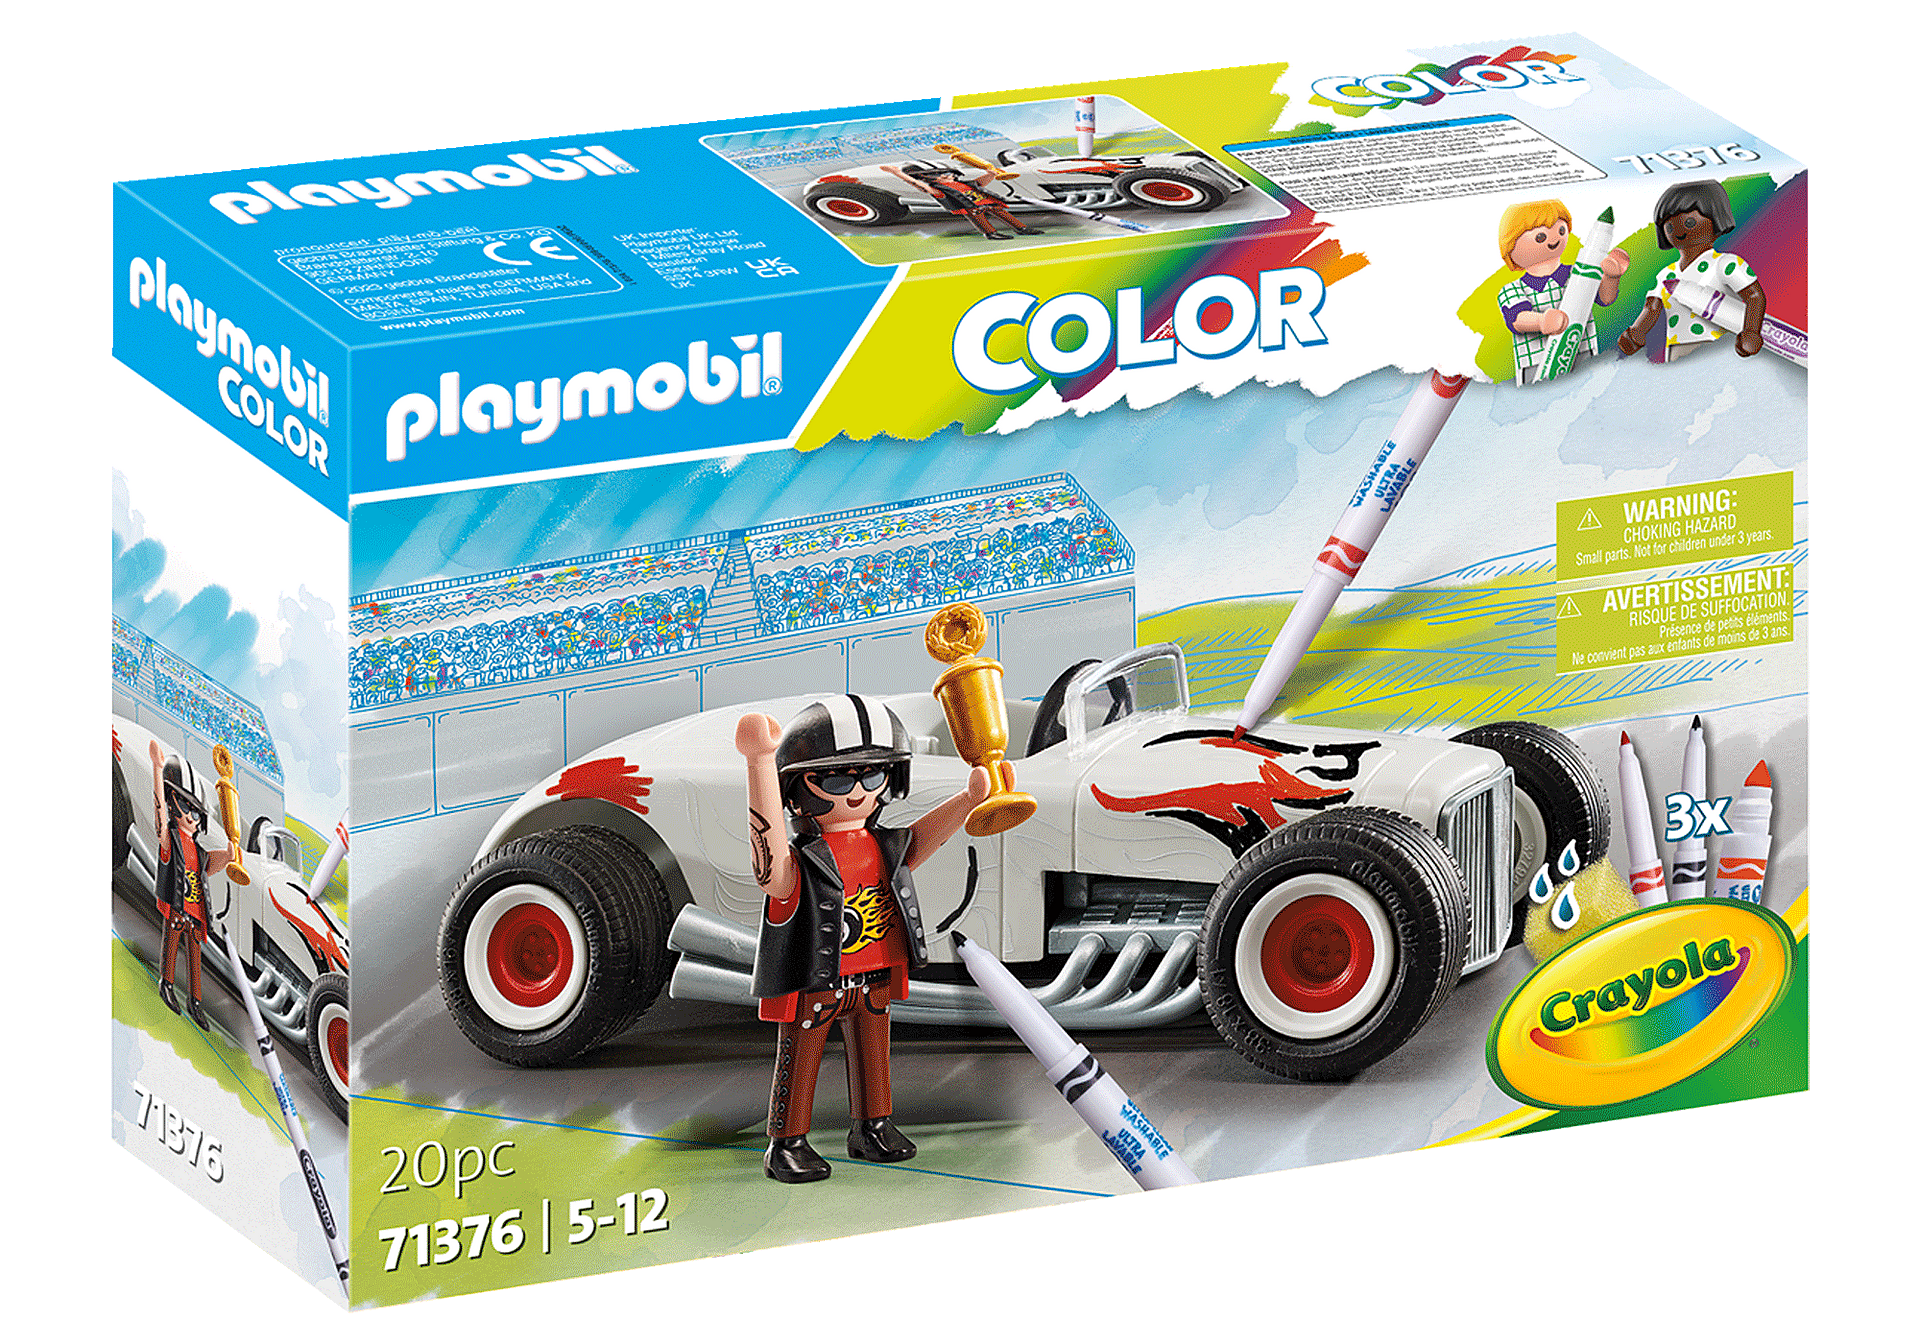 71376 PLAYMOBIL Color: Hot Rod zoom image2